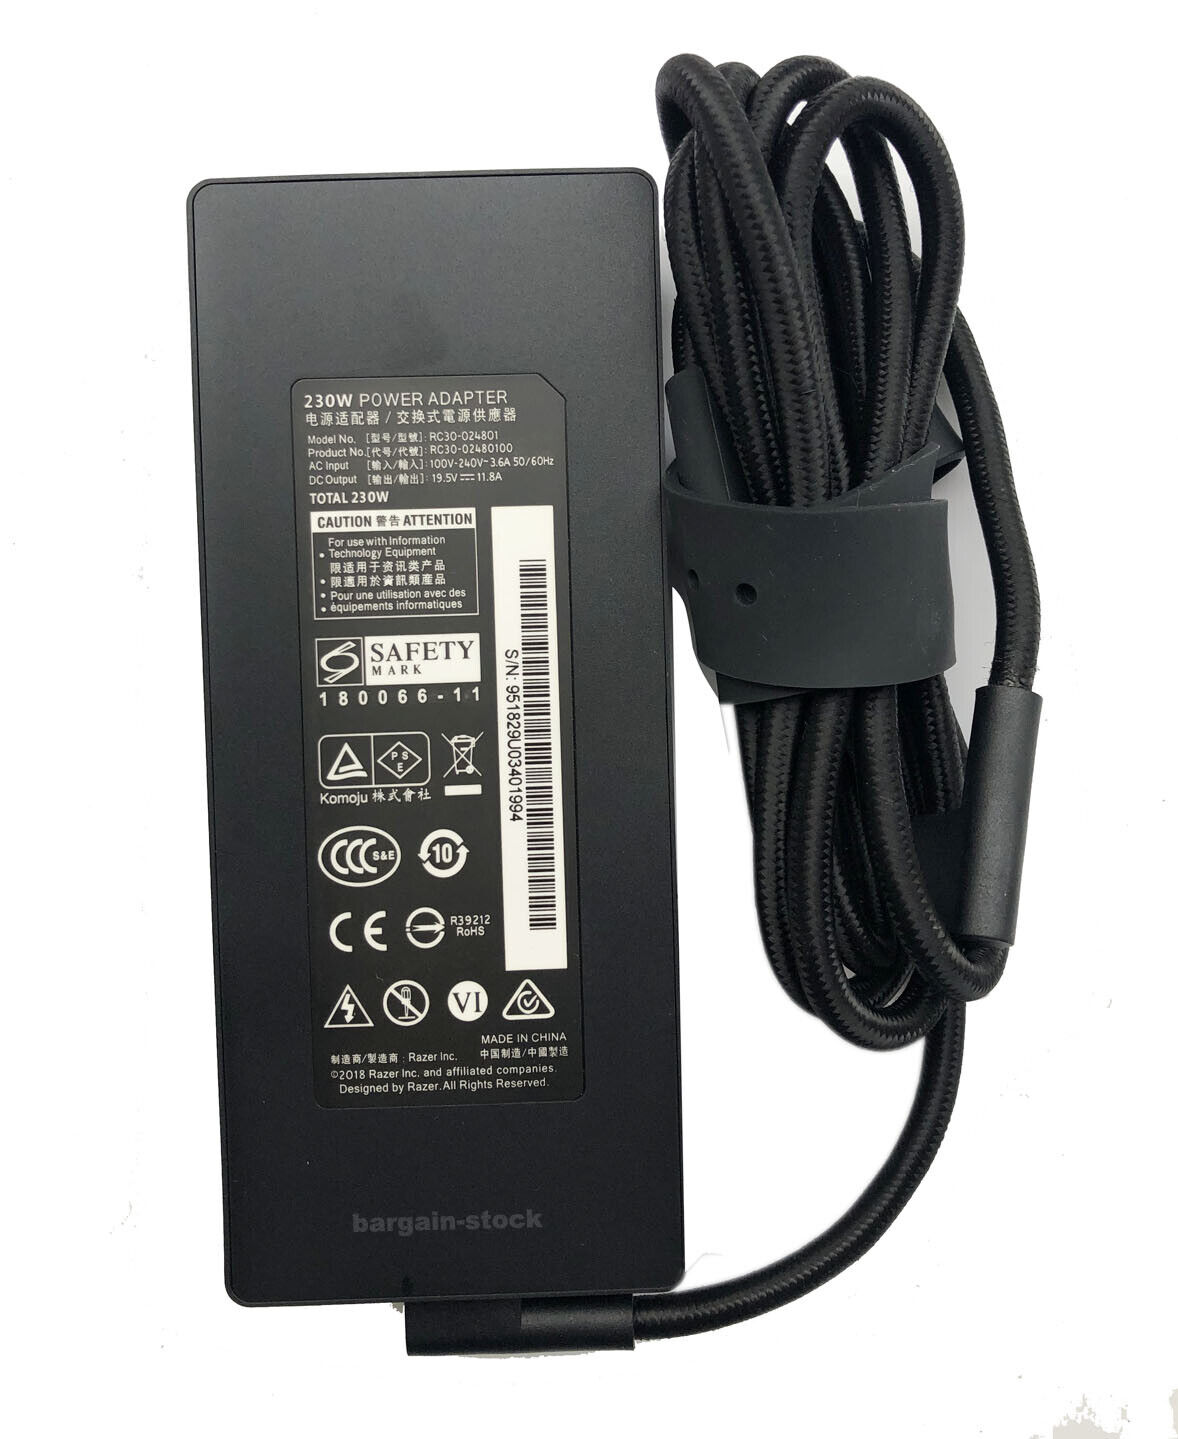 *Brand NEW* Razer Blade 15 RZ09-0328 i7 RTX 2070 RC30-0248 11.8A 230W AC Adapter Charger